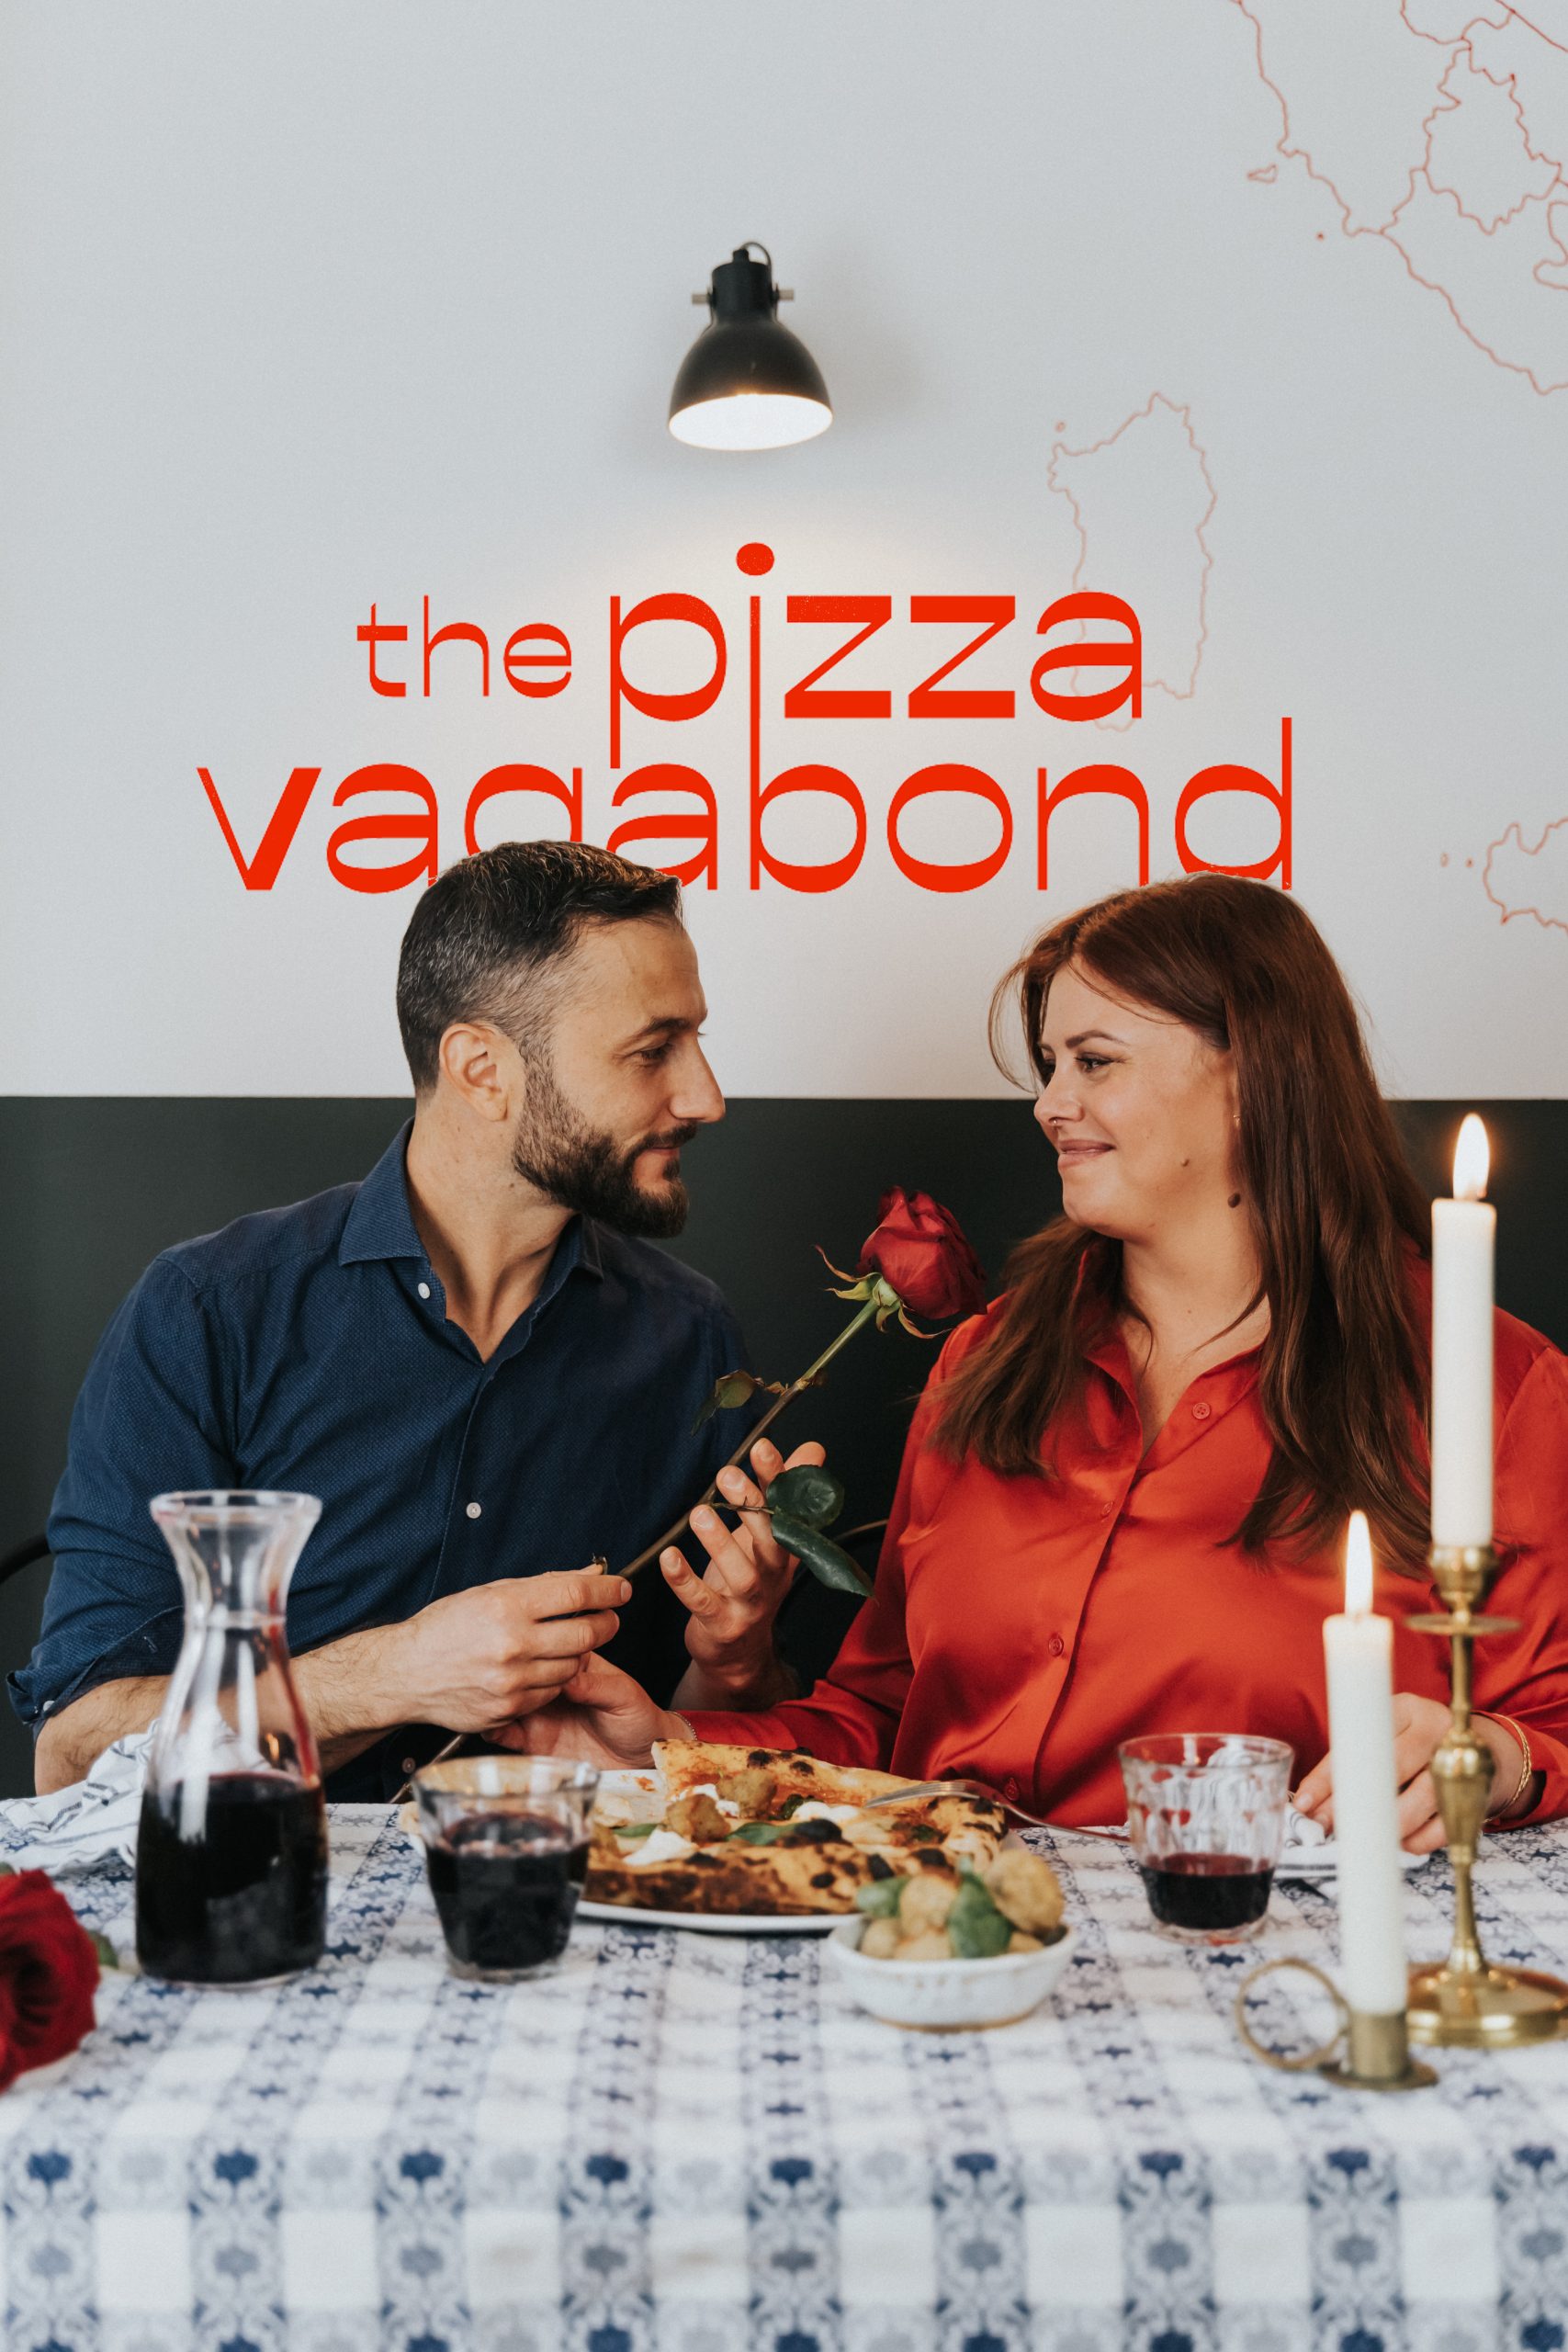 owners of the pizza vagabond - Italian restaurant amsterdam for best pizza